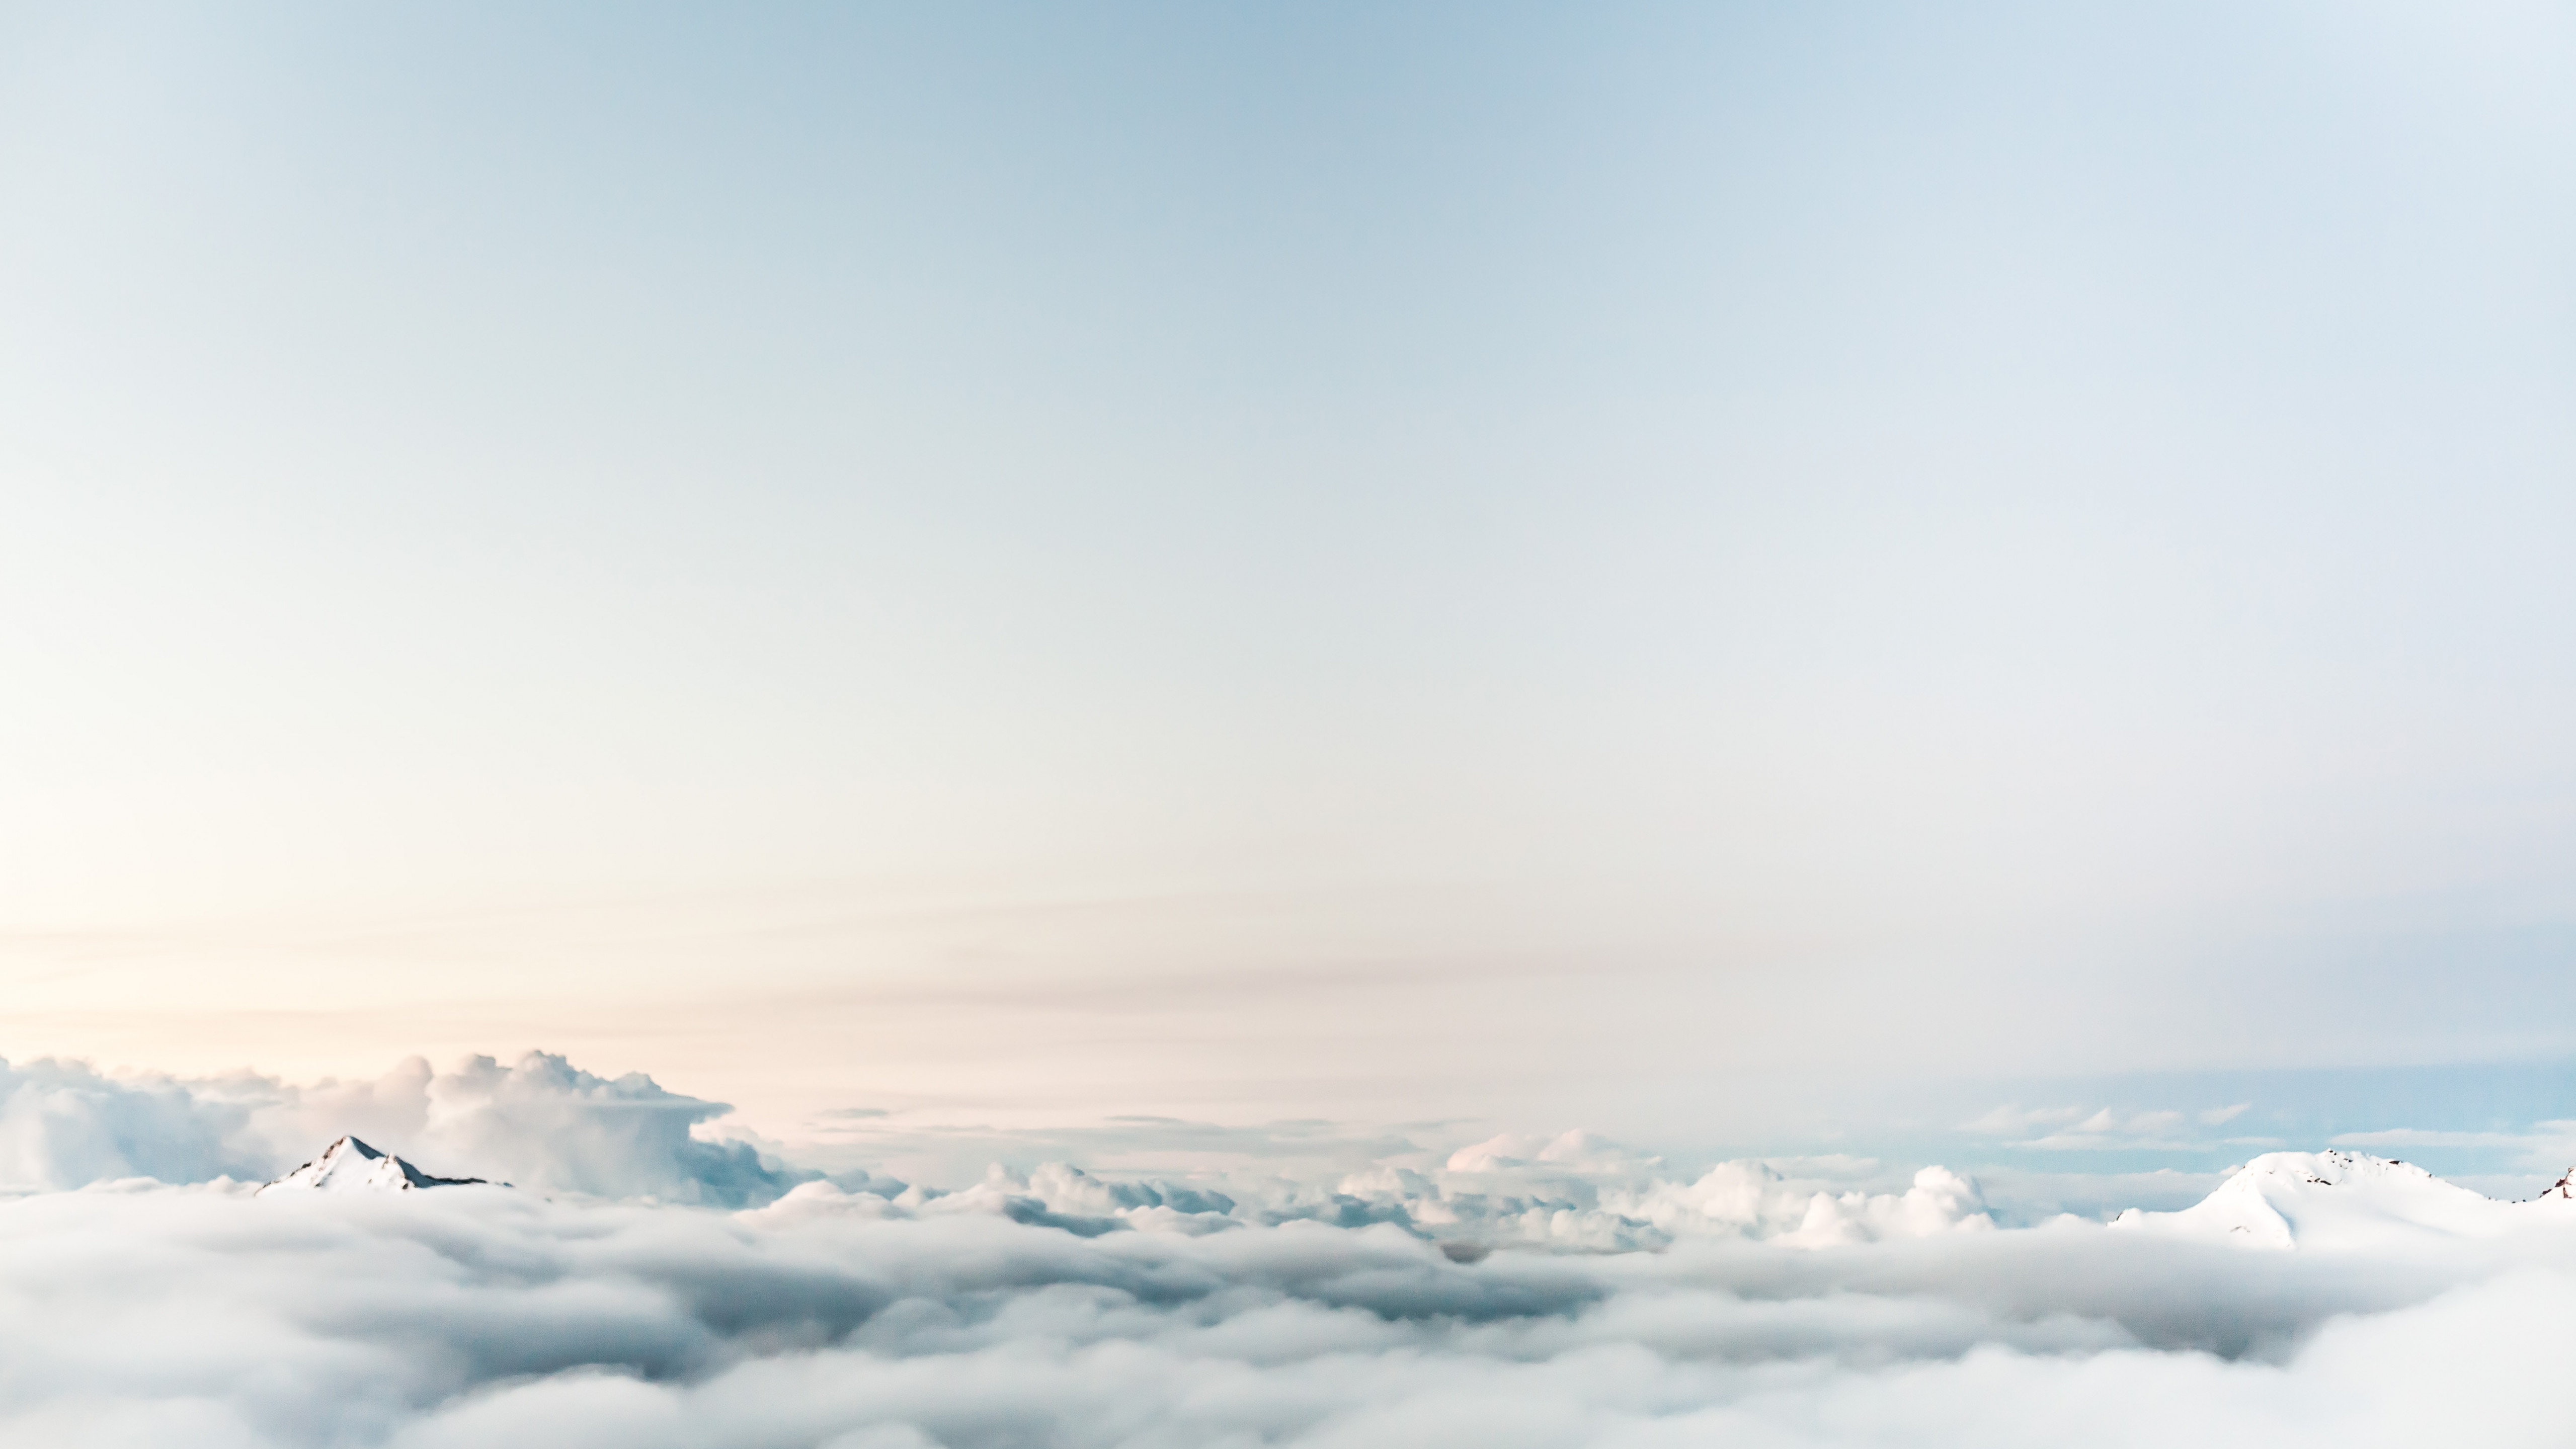 Floating on clouds wallpaper 5120x2880